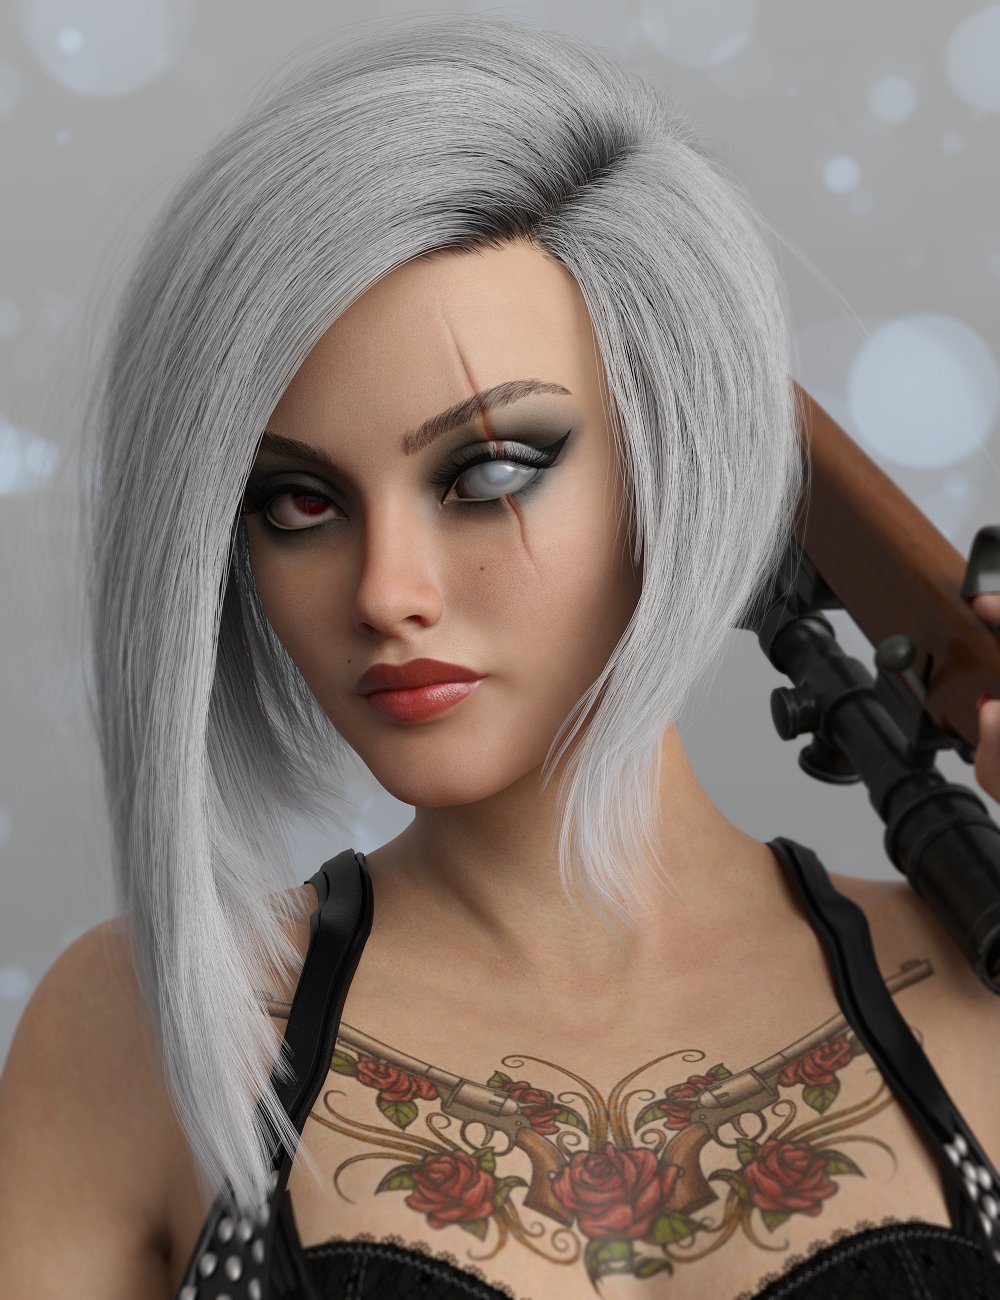 Ashe for Honni 8 and Genesis 8 Female_DAZ3D下载站